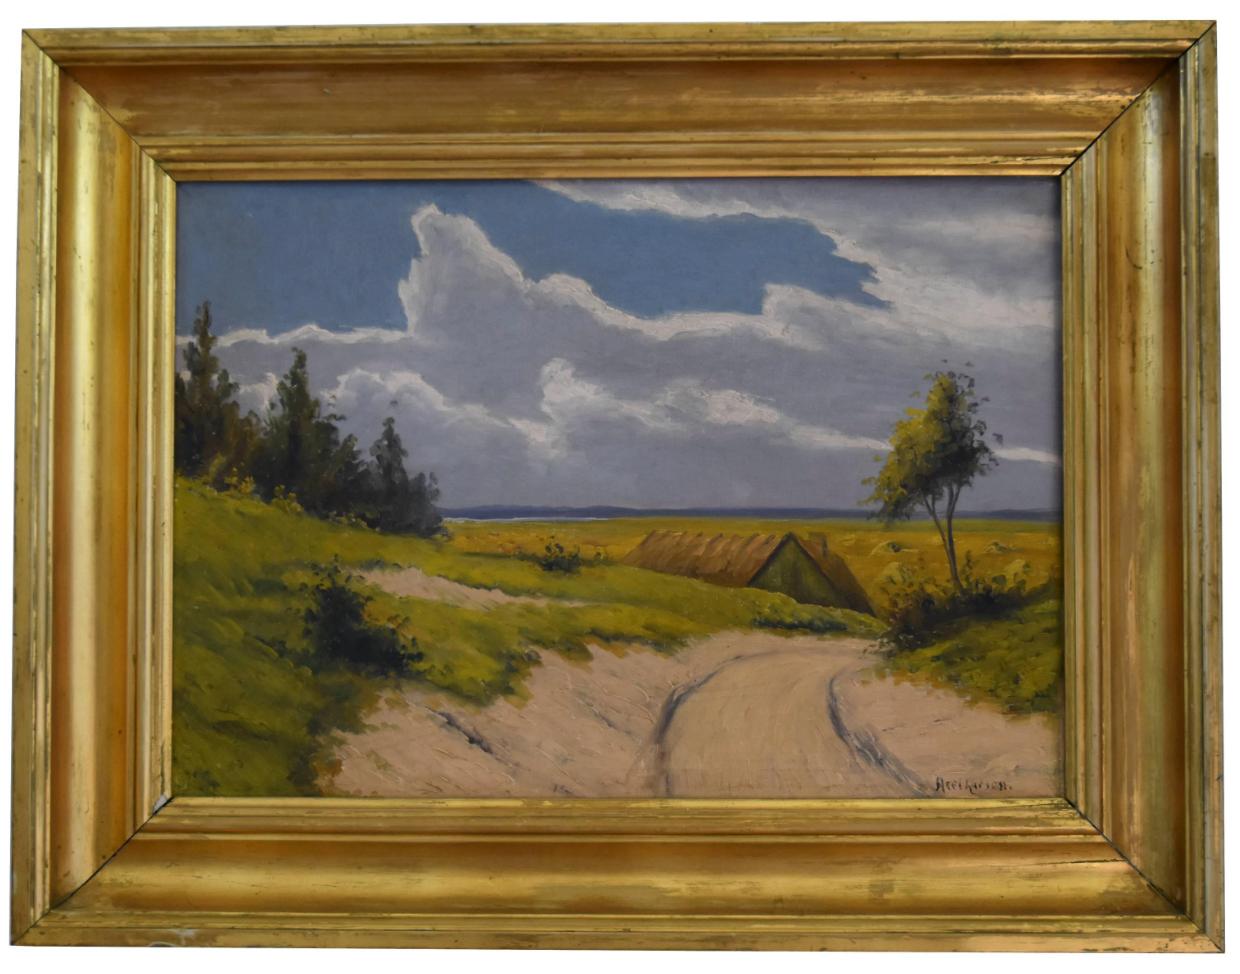 Unknown Landscape Painting - Landscape Oil Painting with a Country Road